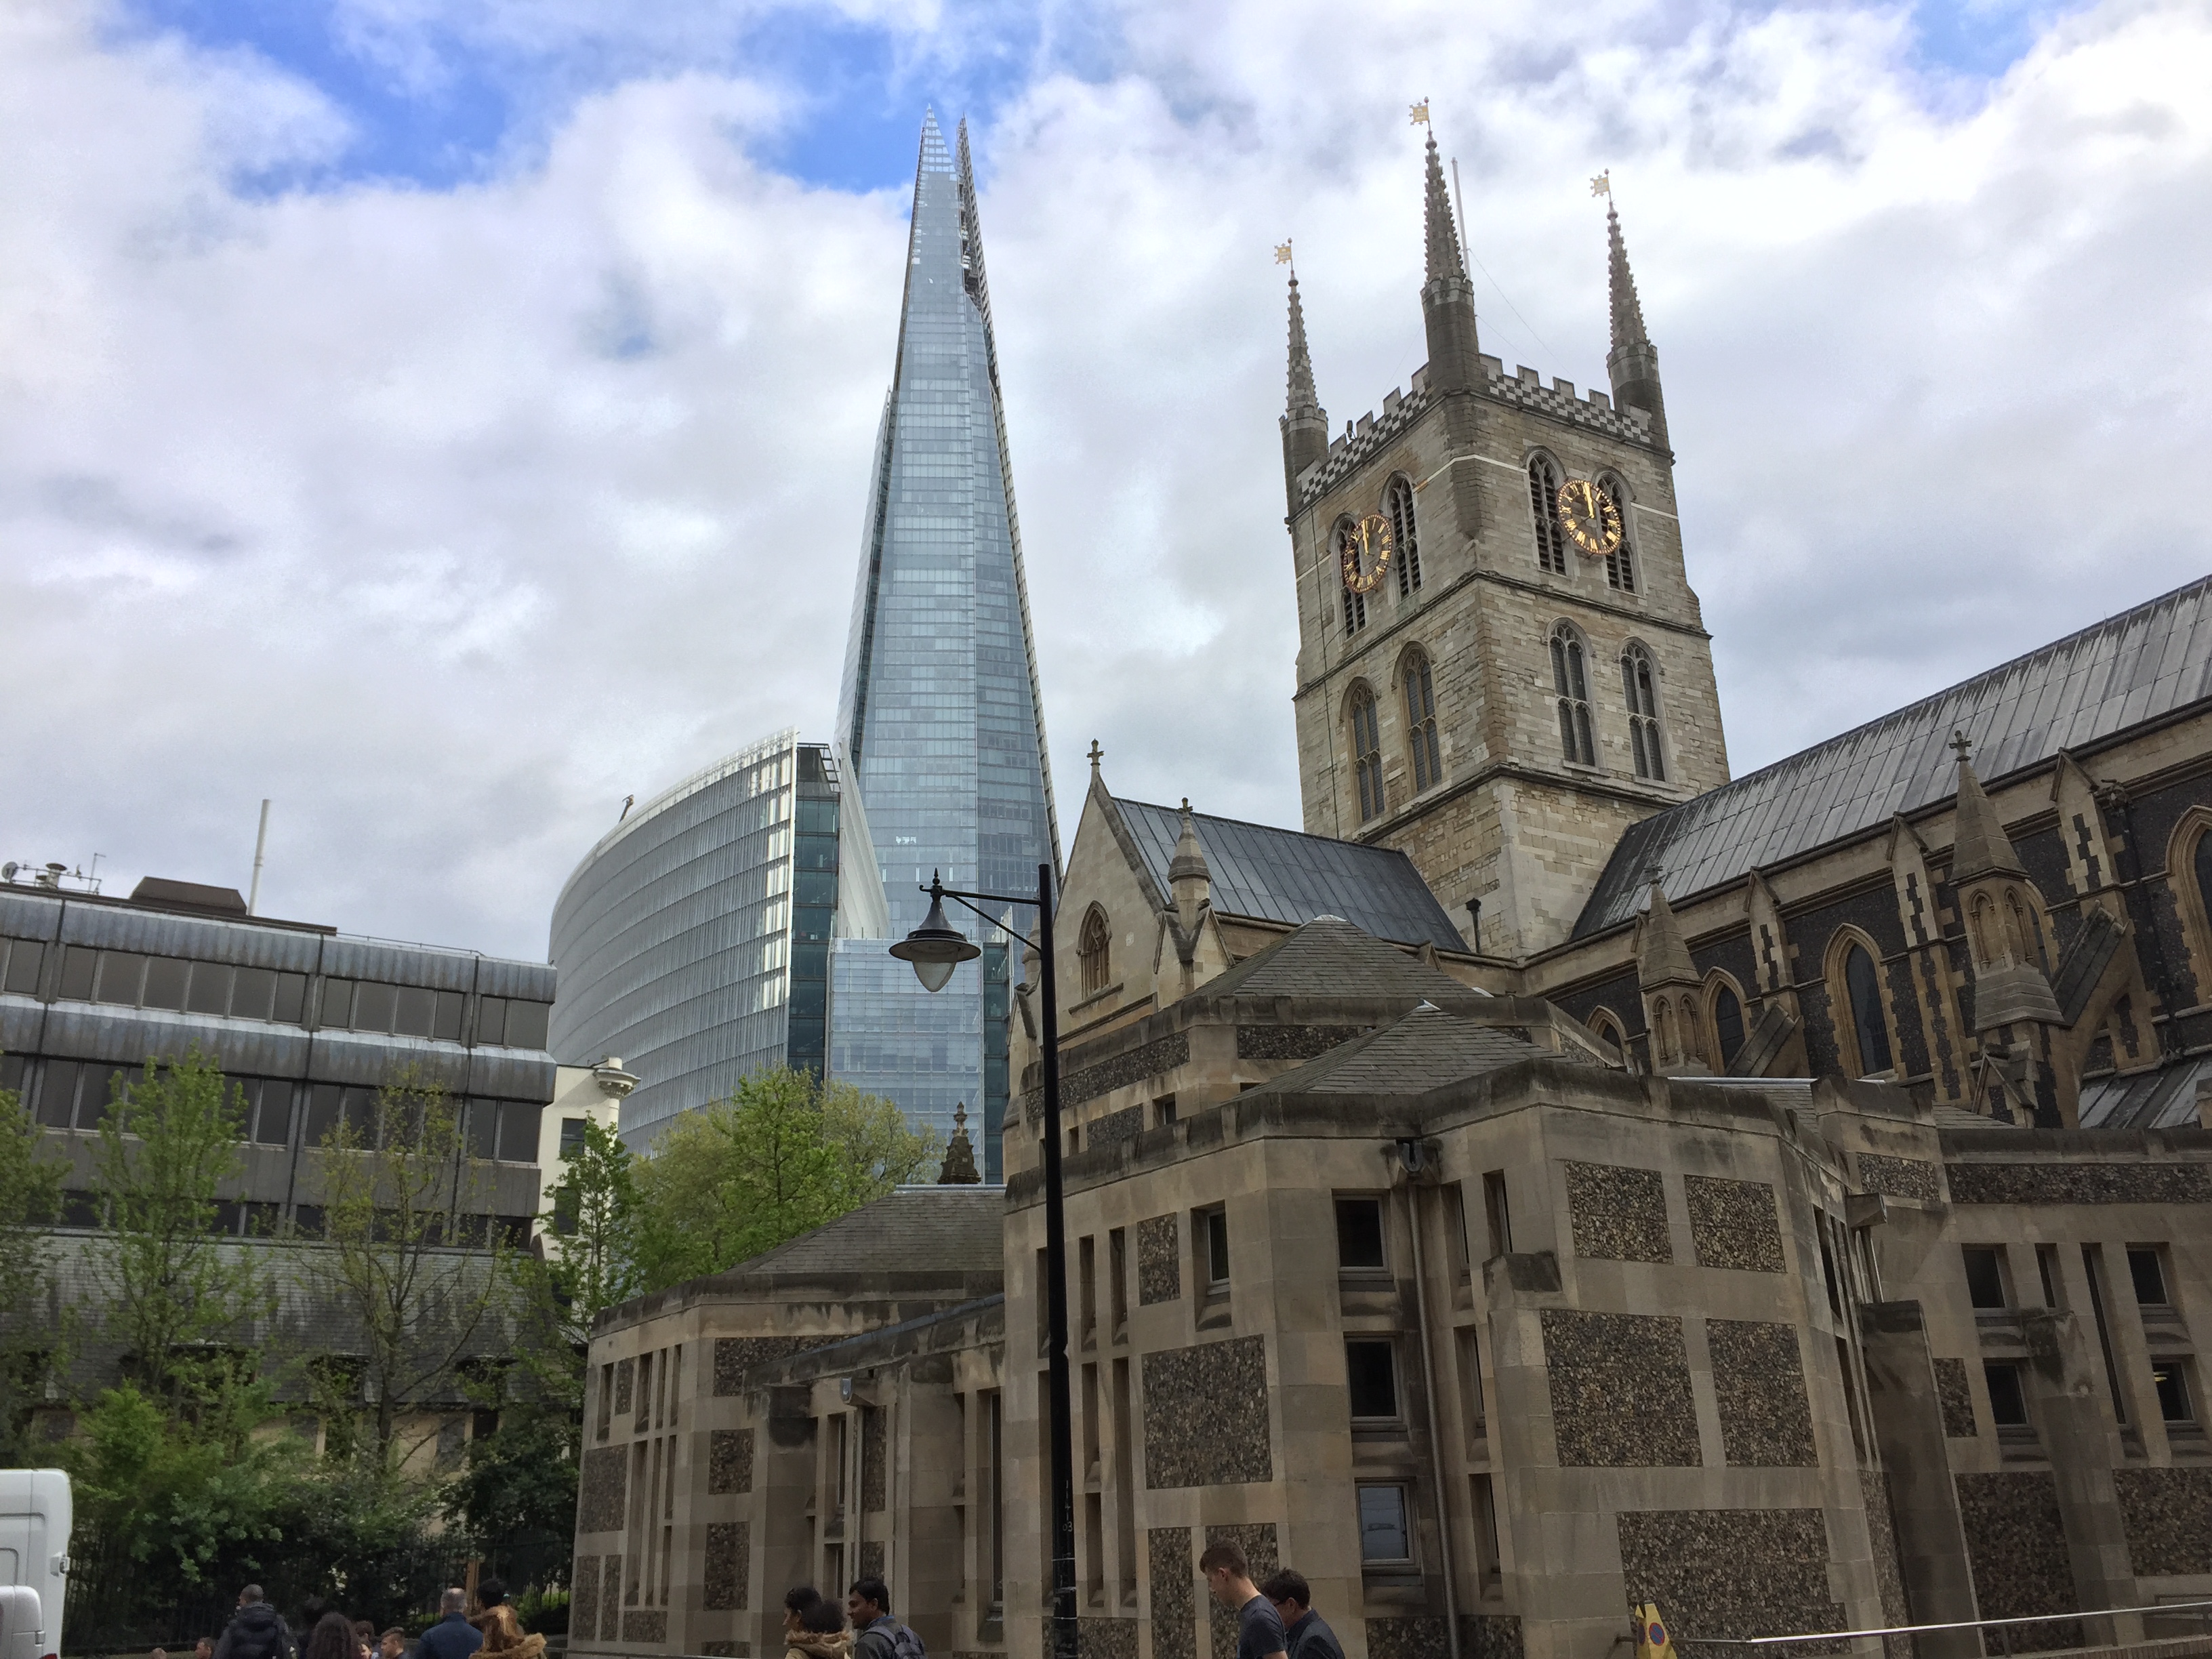 The Shard and Southwark Cathedral